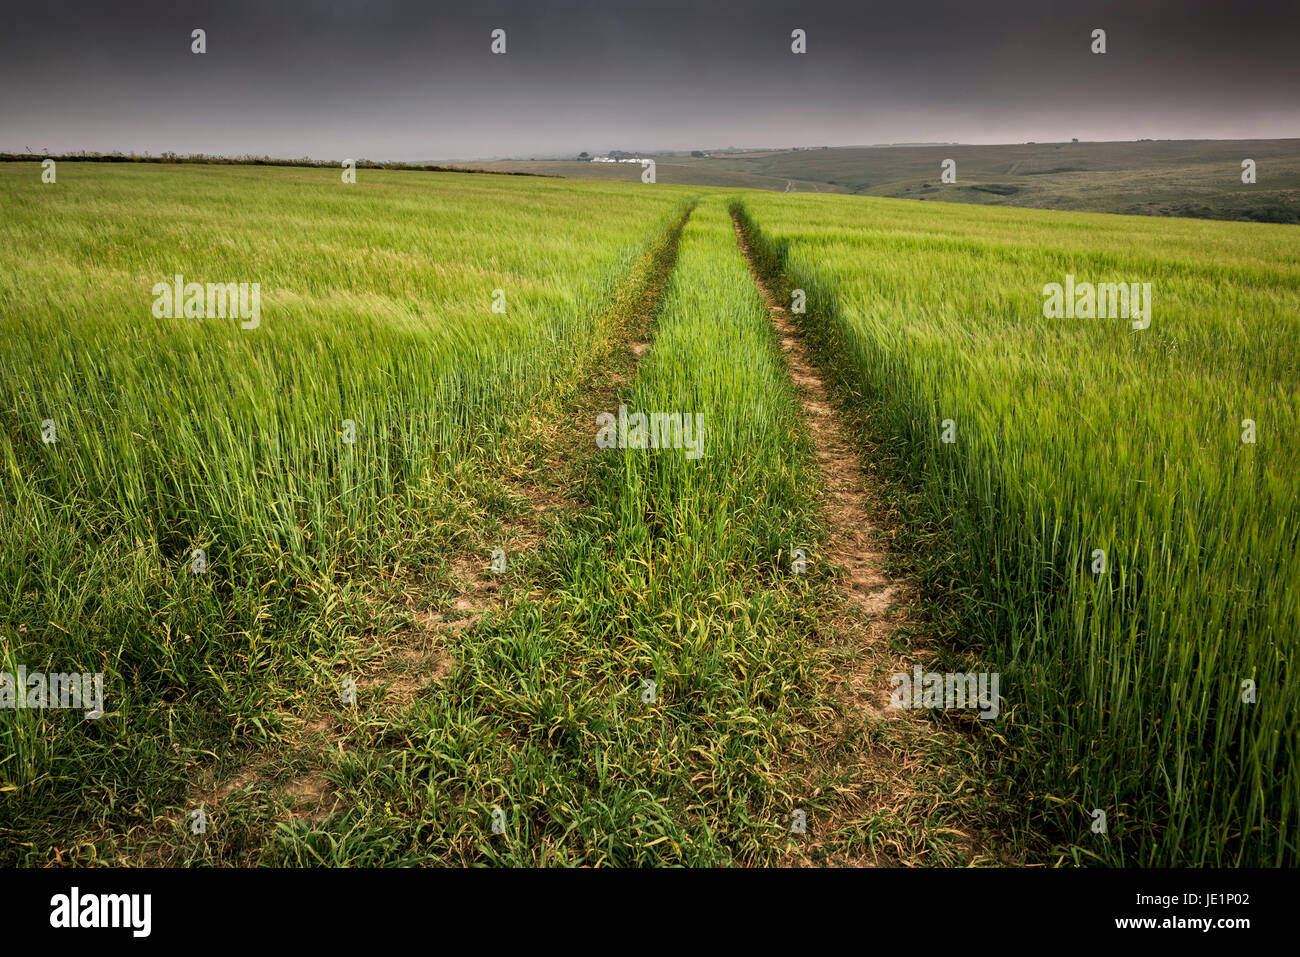 A crop growing in a field on West pentire in Newquay, Cornwall. Stock Photo